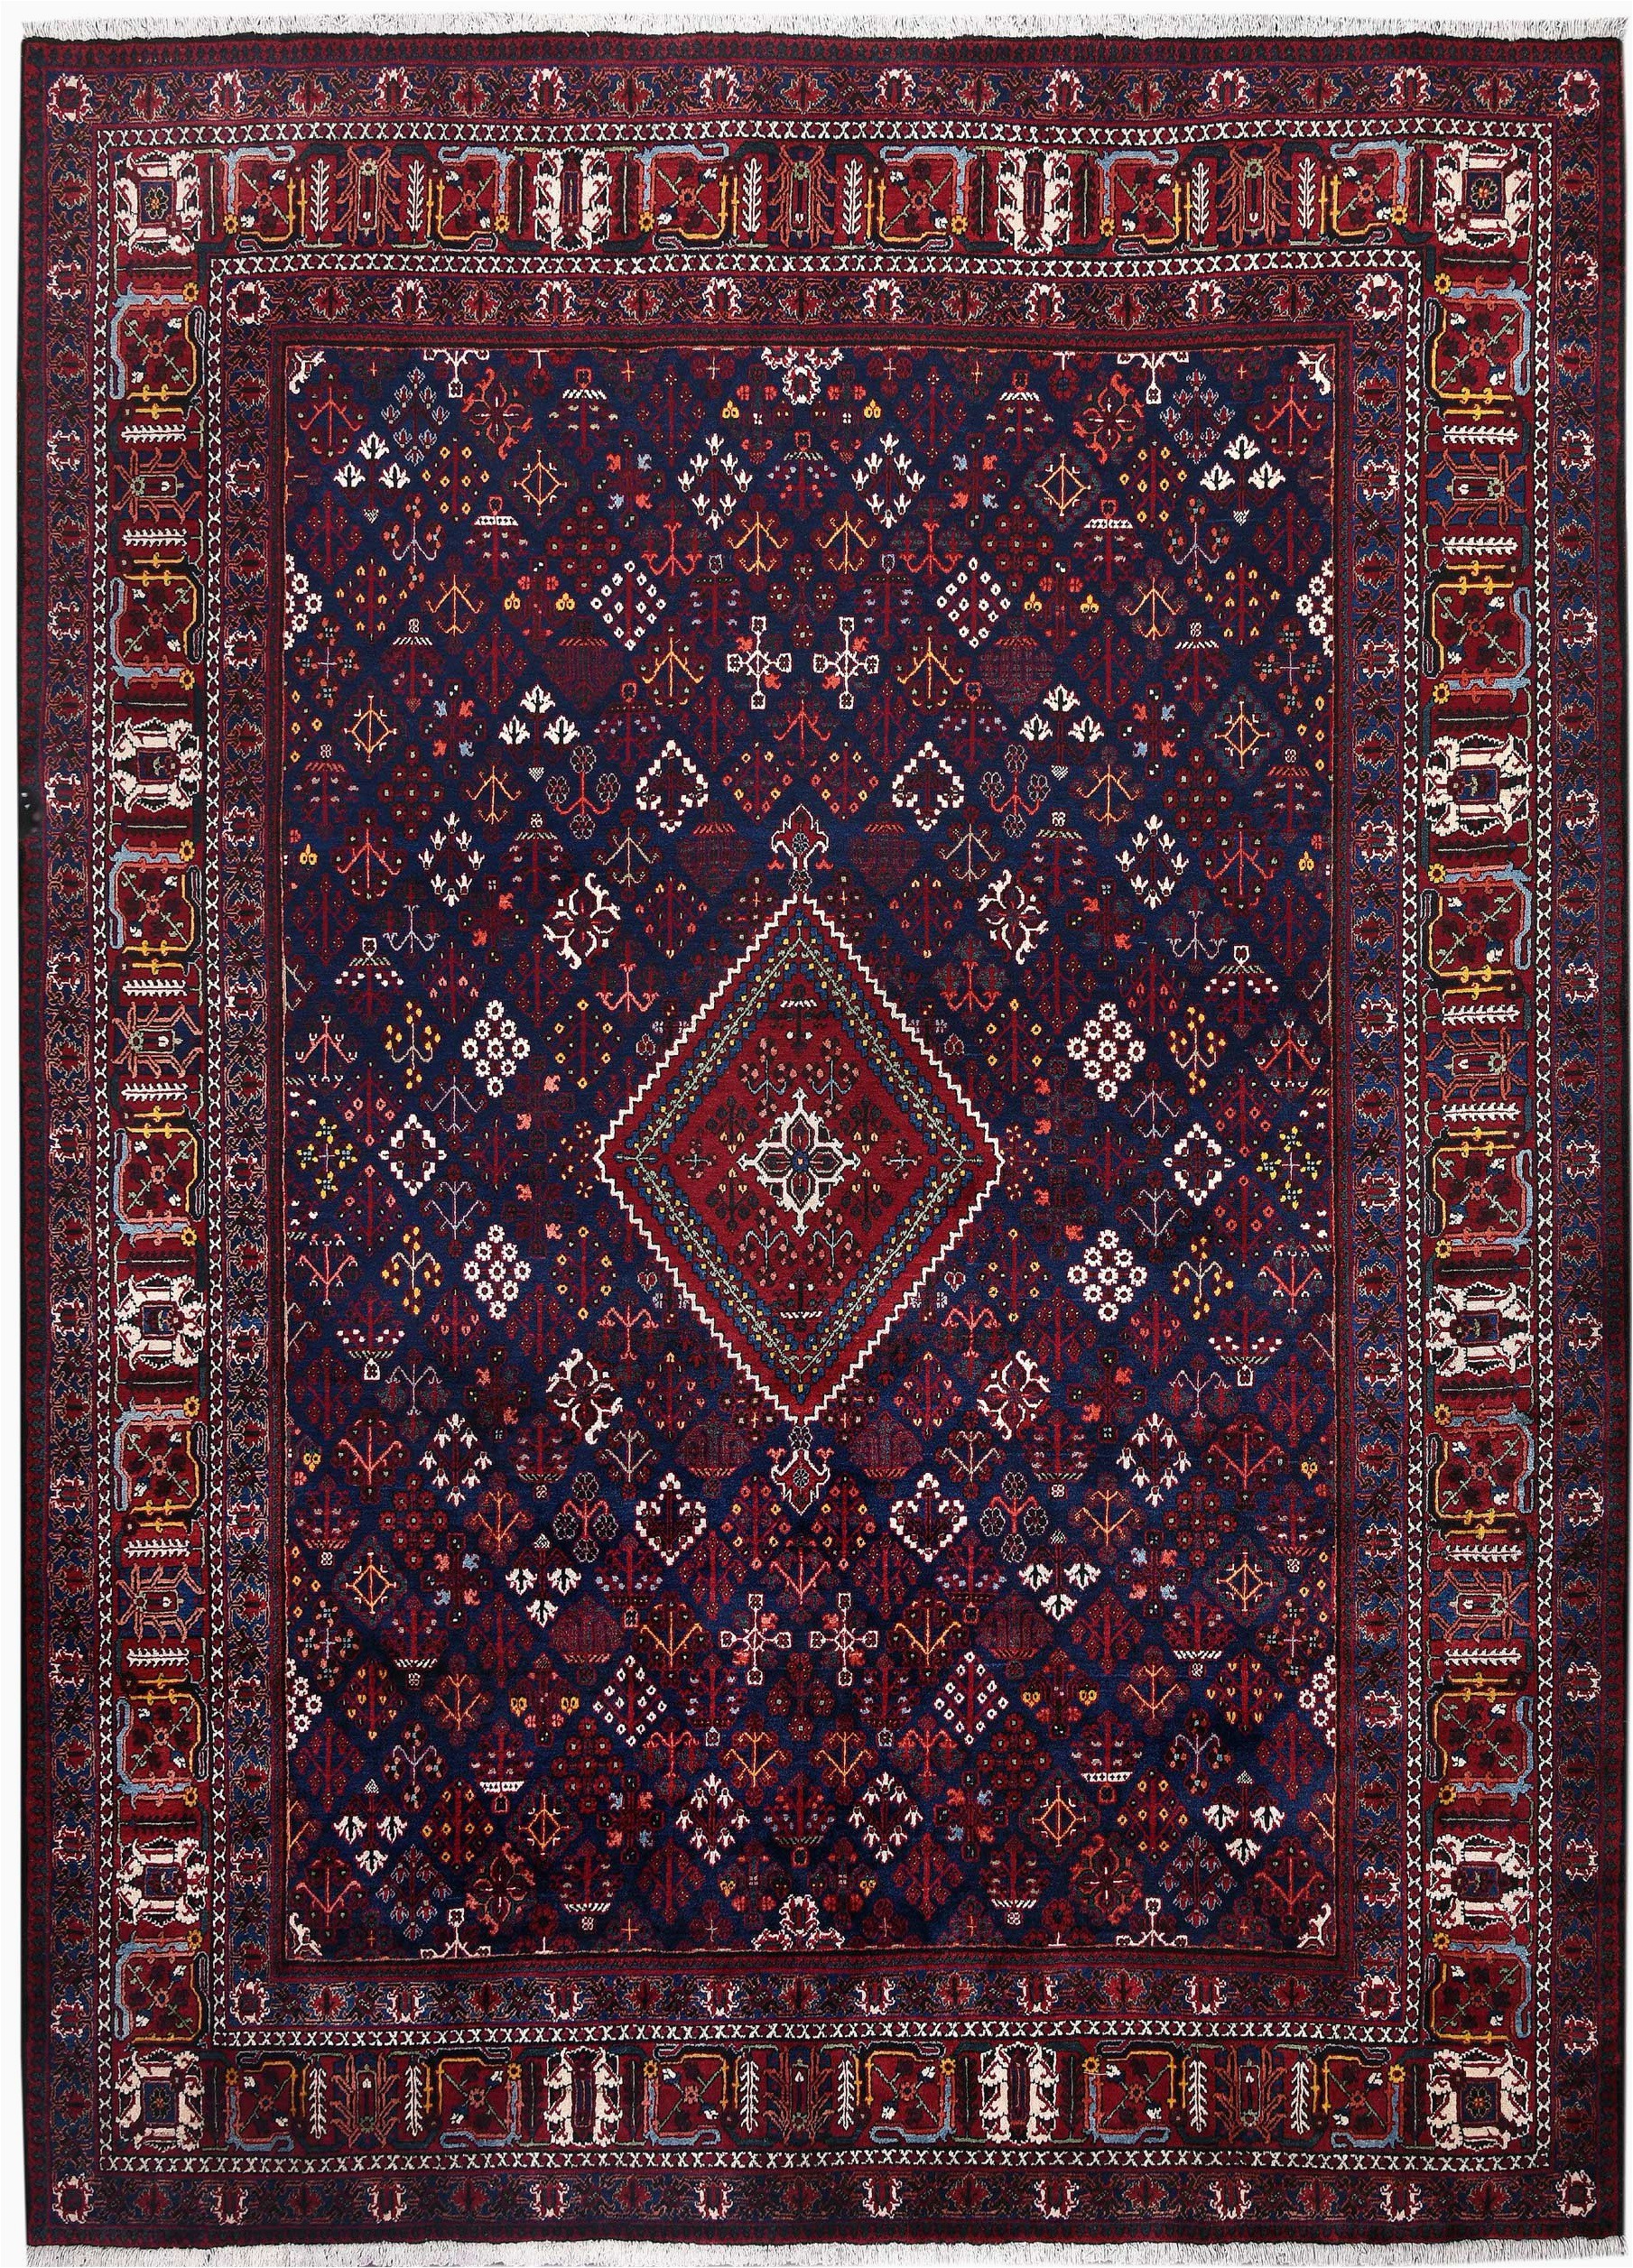 joschaghan 3x4m blue persian rug for sale dr353